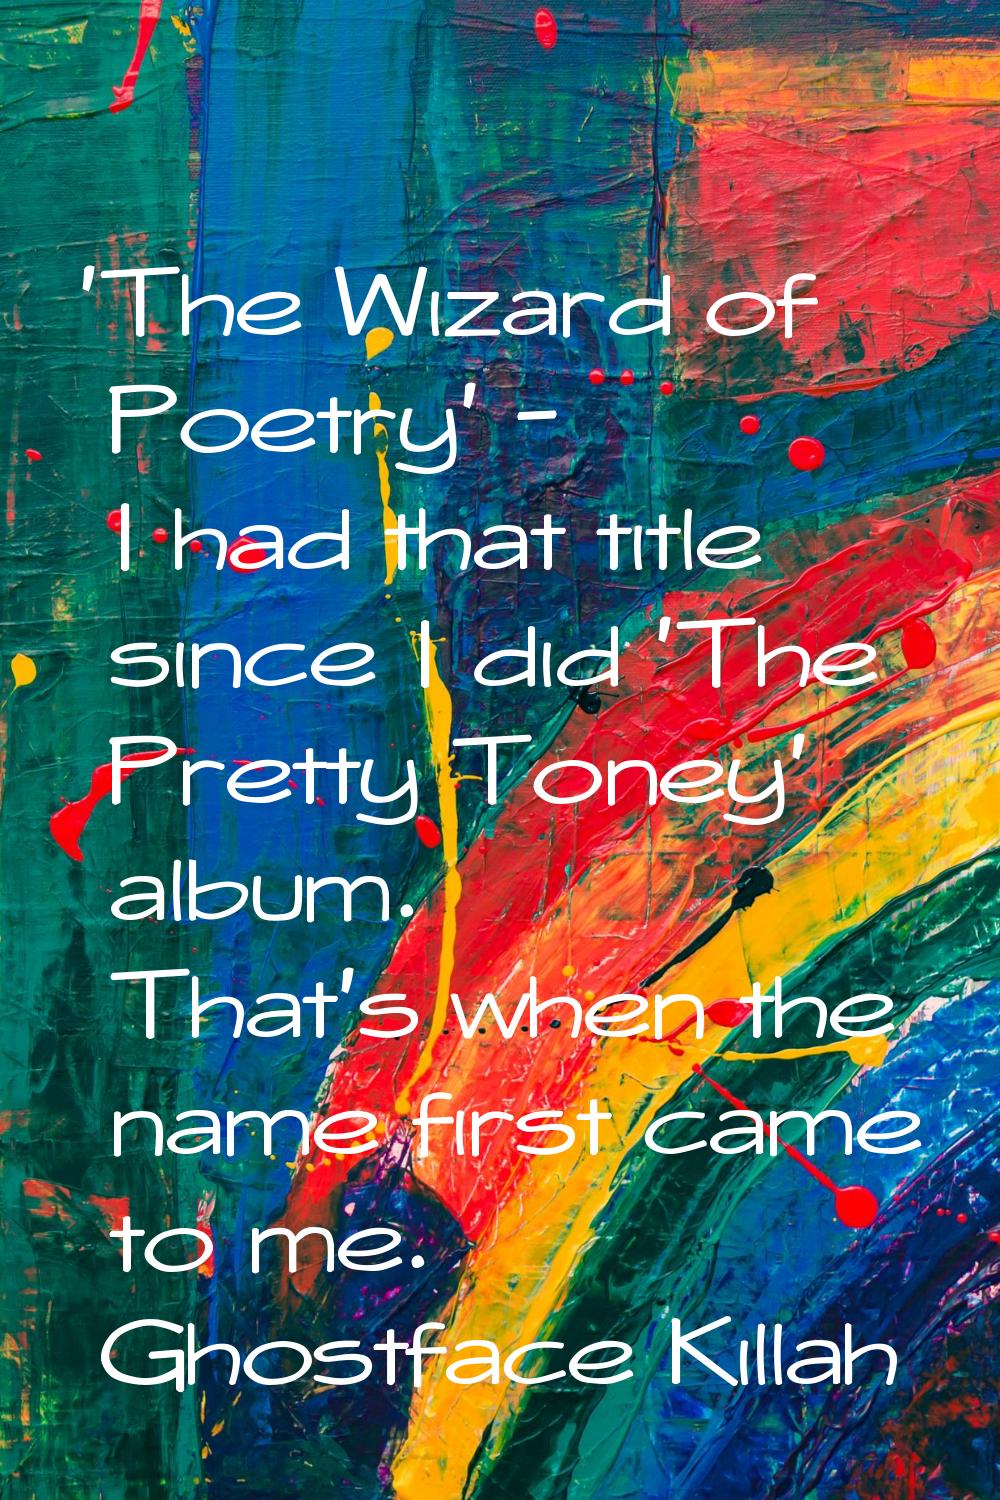 'The Wizard of Poetry' - I had that title since I did 'The Pretty Toney' album. That's when the nam